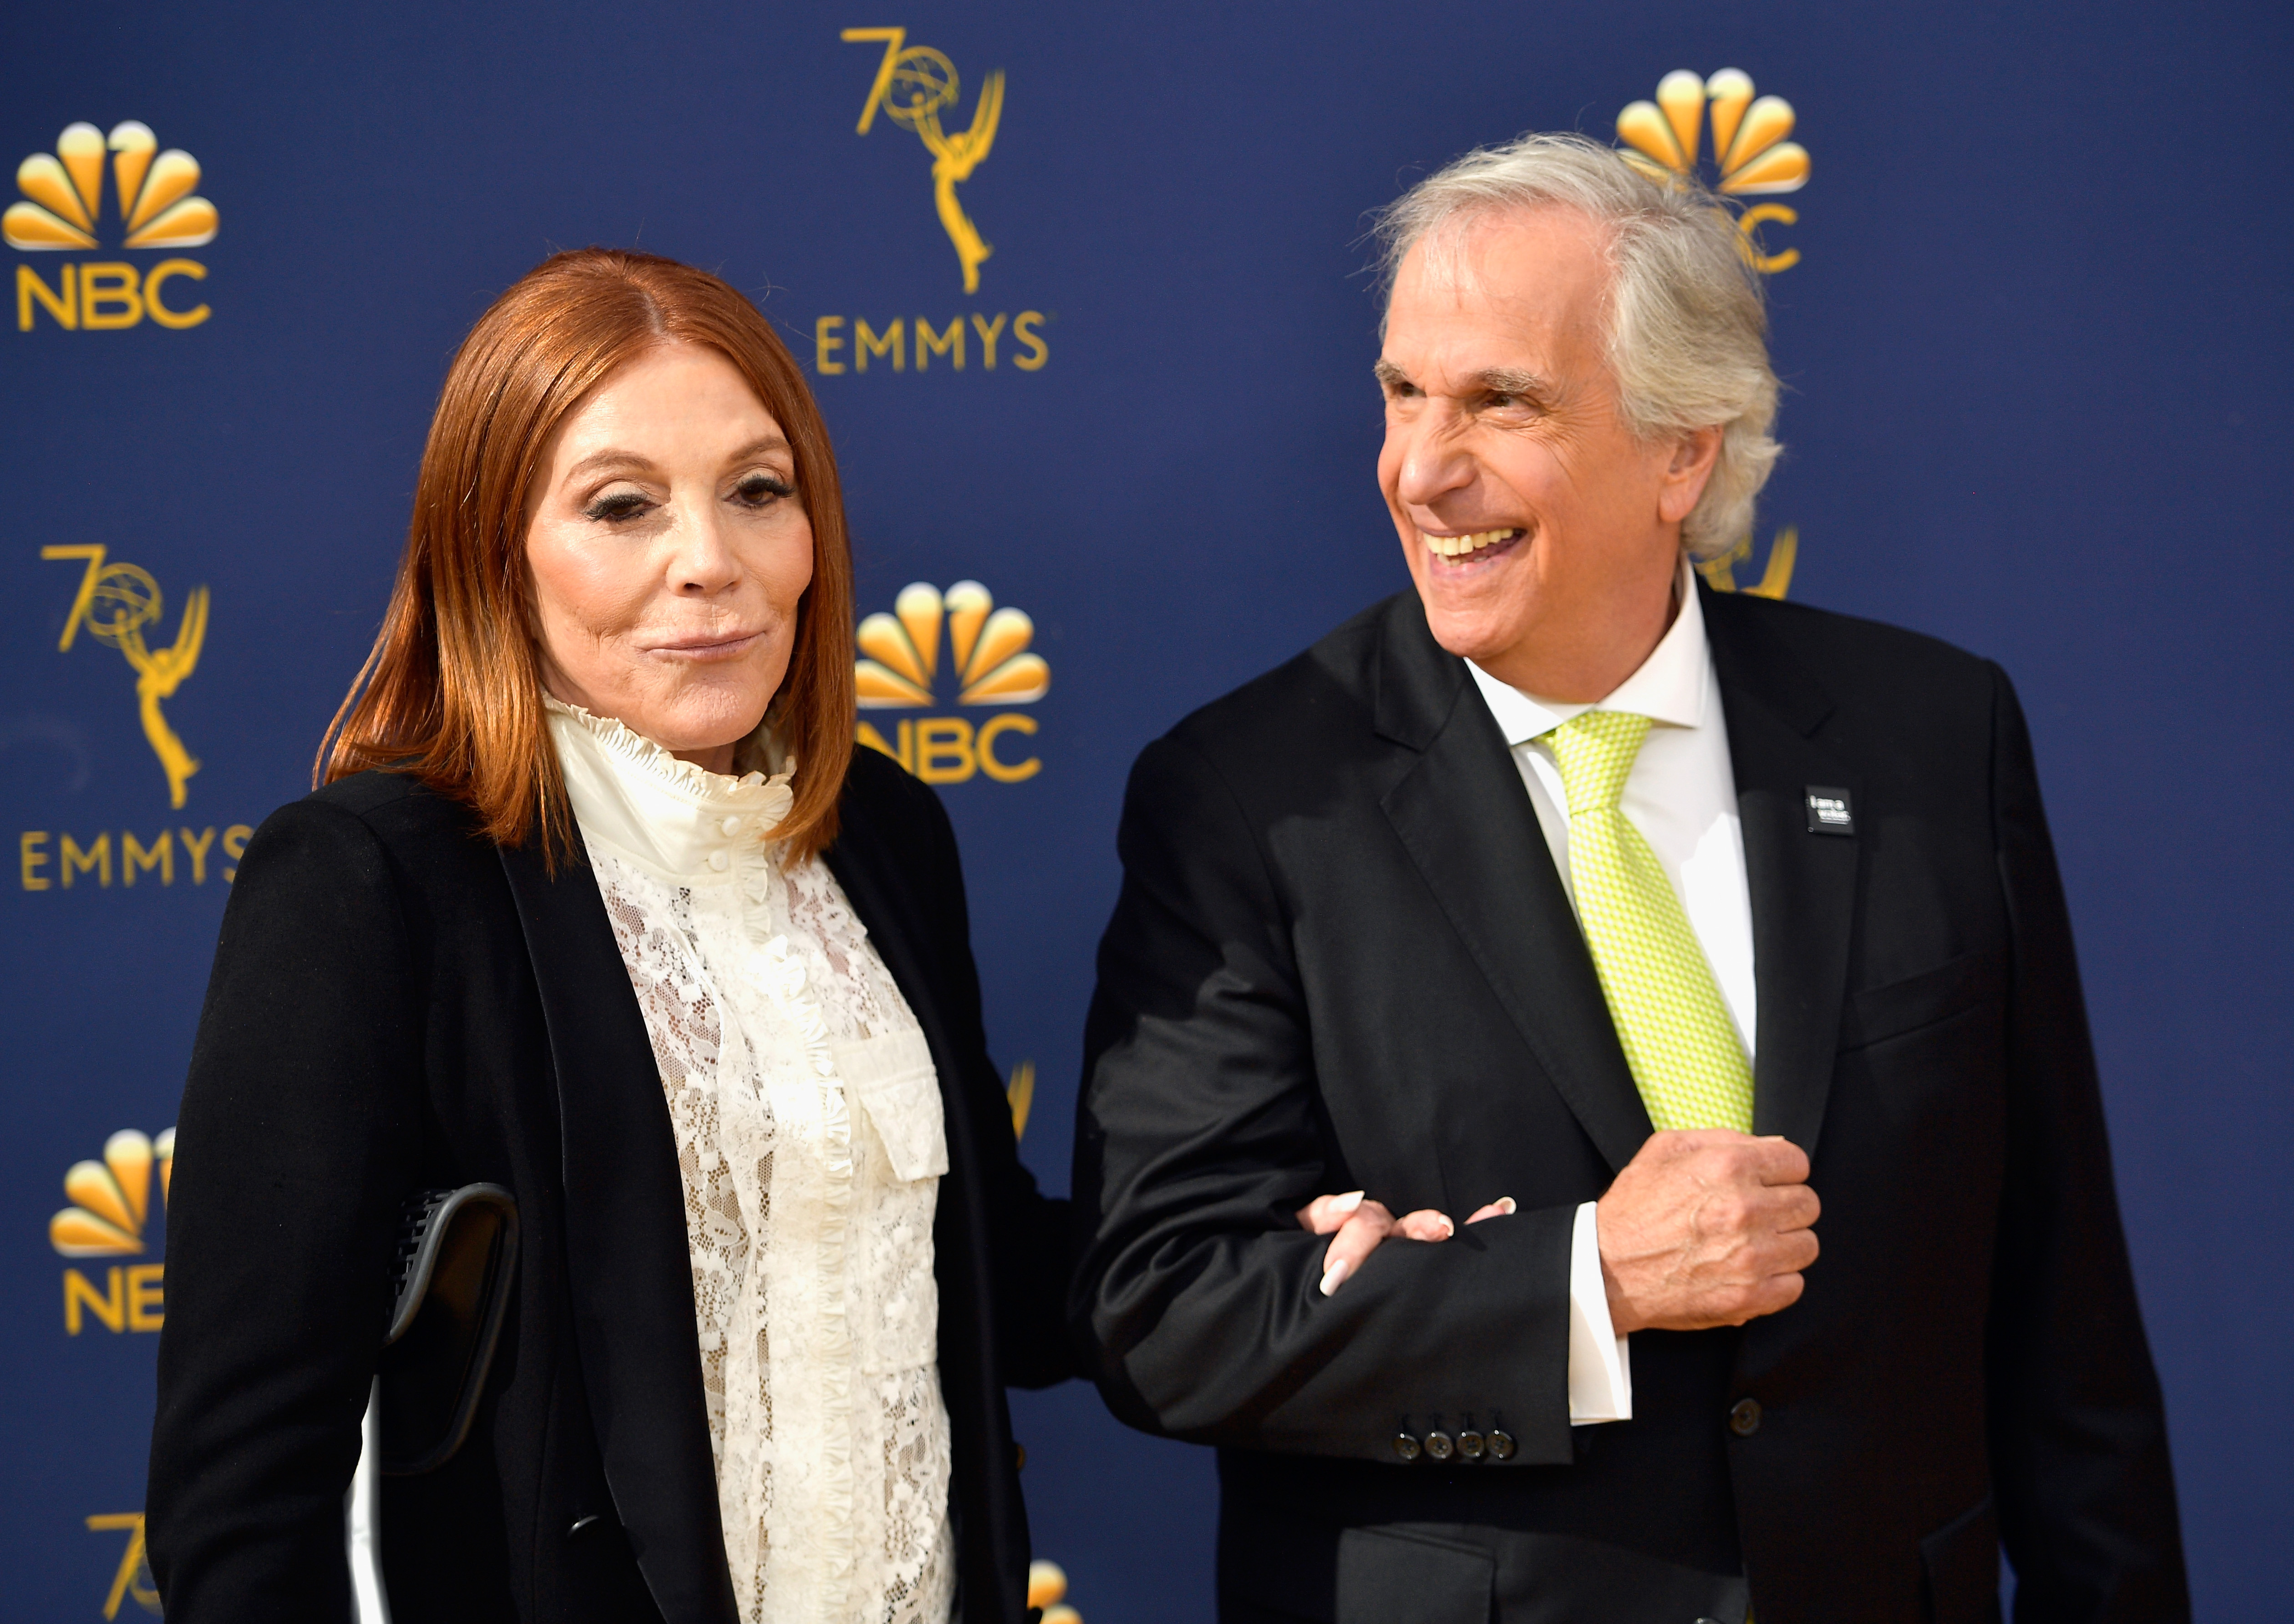 Stacey Weitzman and Henry Winkler at the 70th Emmy Awards in Los Angeles, California on September 17, 2018 | Source: Getty Images